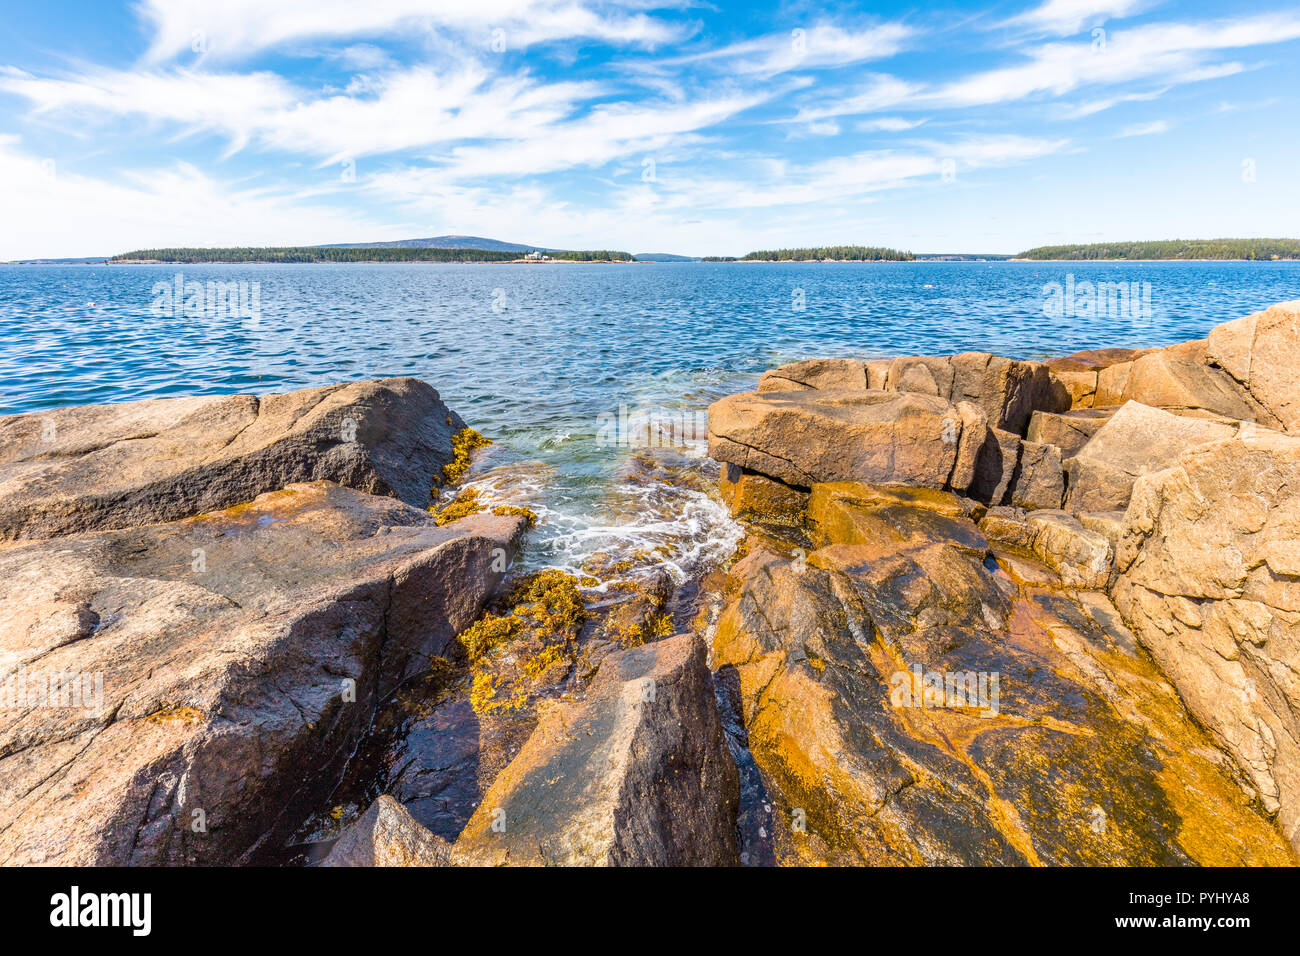 Schoodic Peninsula on the Atlantic Ocean in Acadia National Park on the coast of Maine in the United States Stock Photo